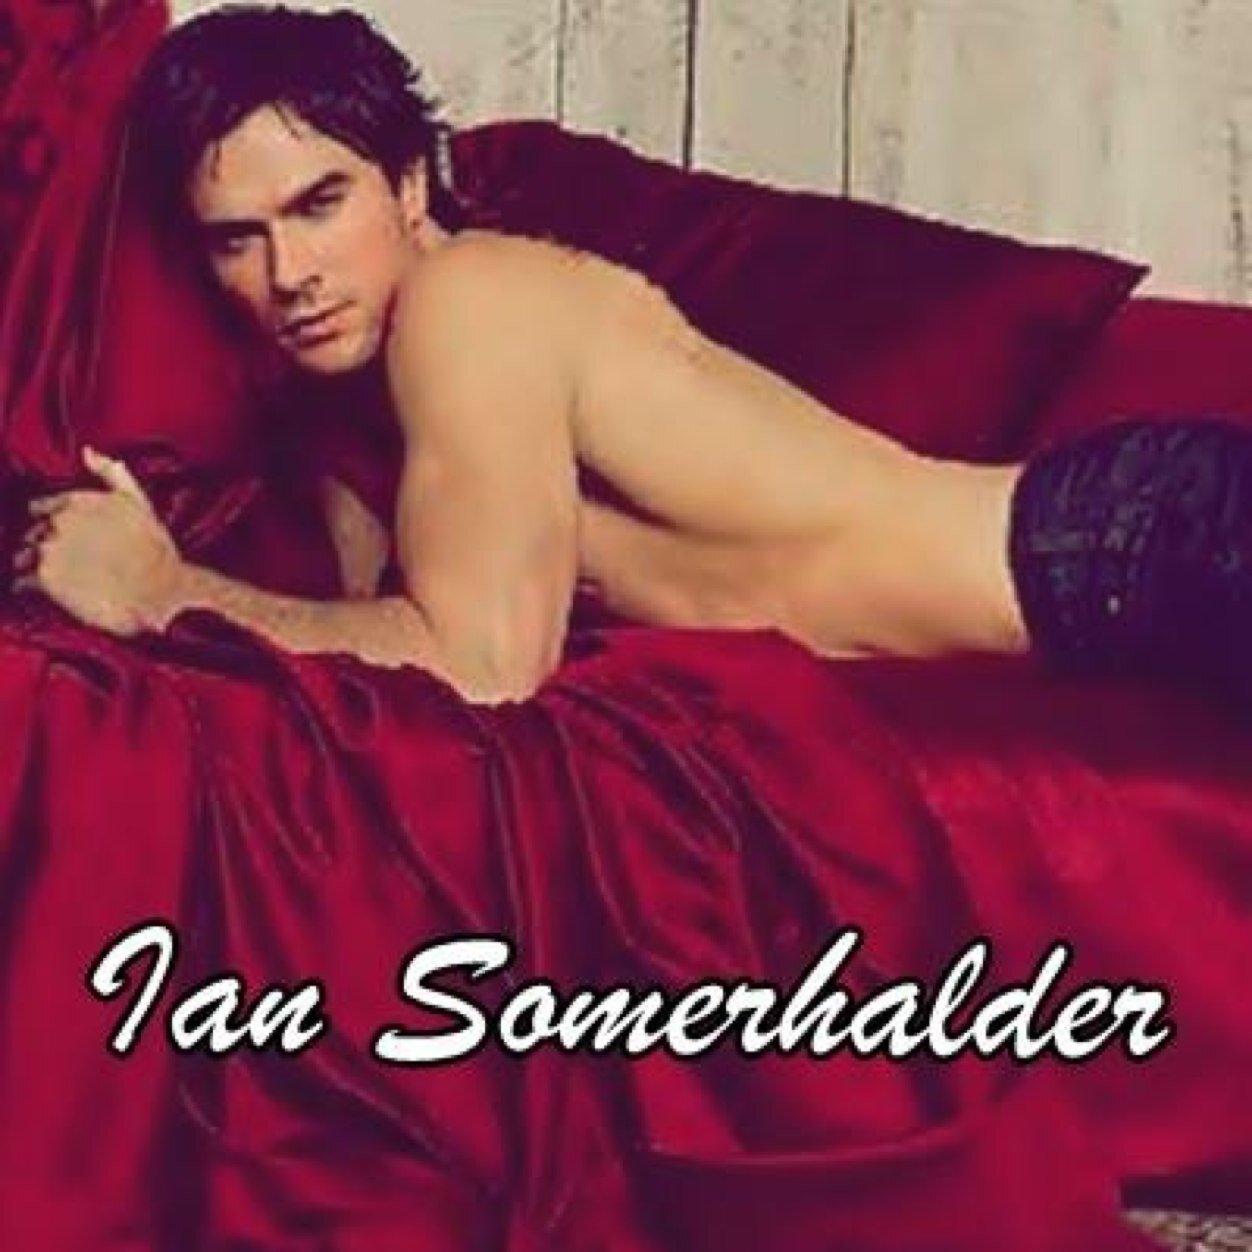 U know what they say @iansomerhalder a guy who treats his girl like a princess came from a queen❤